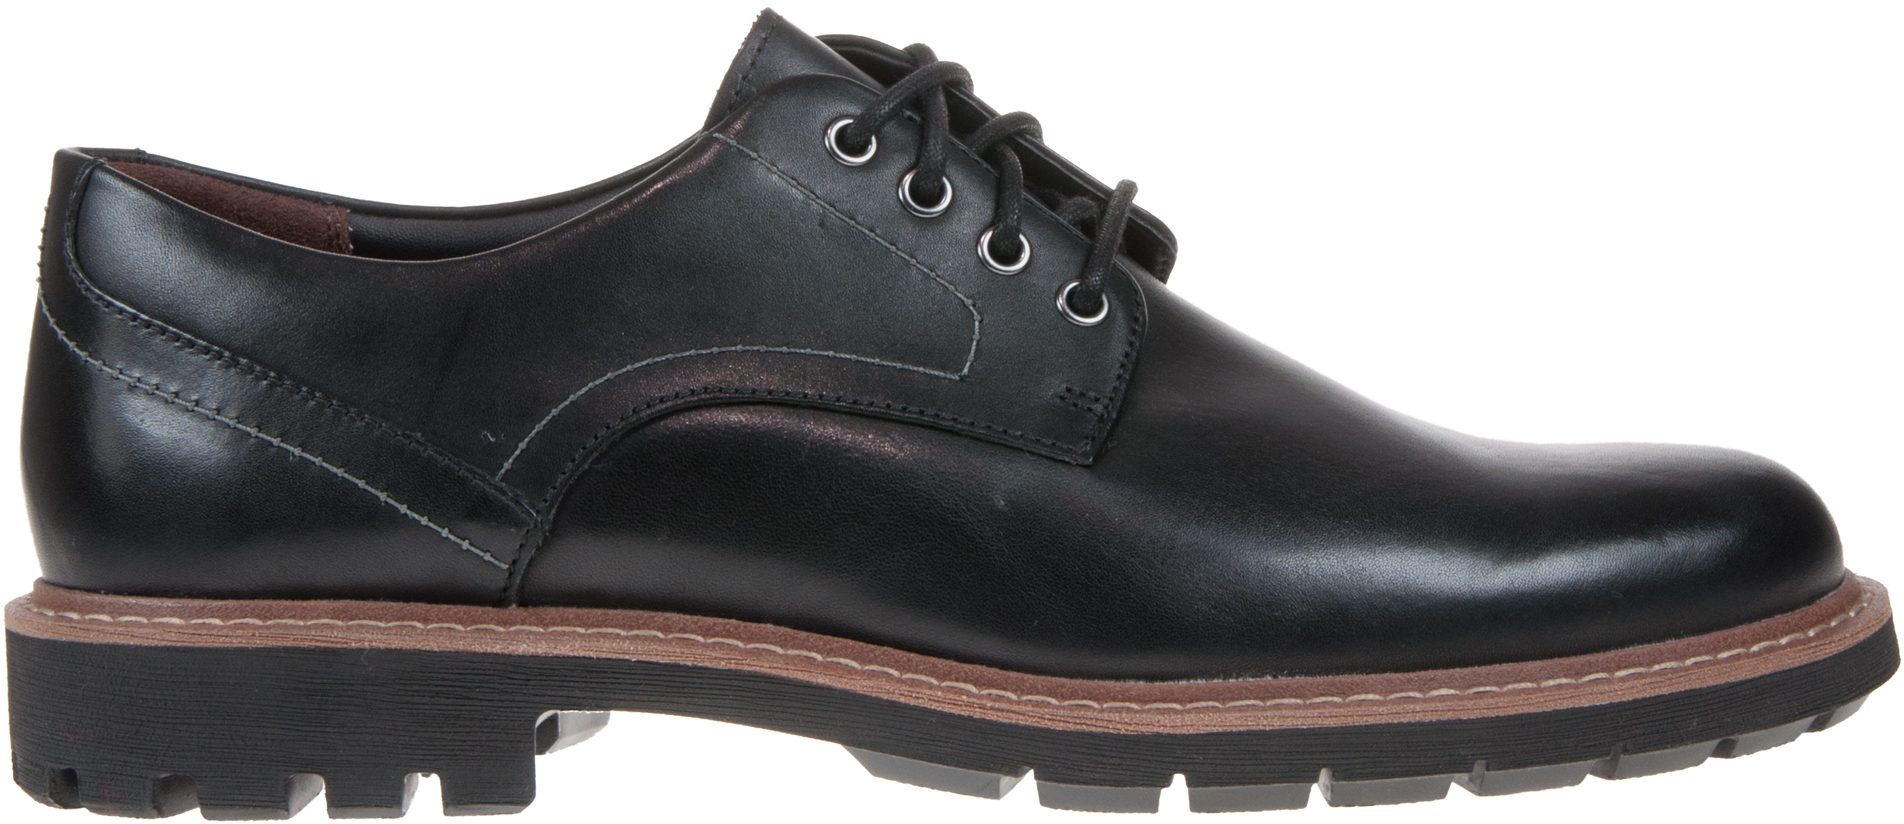 Clarks Batcombe Hall Black Leather 26127549 - Casual Shoes - Humphries ...